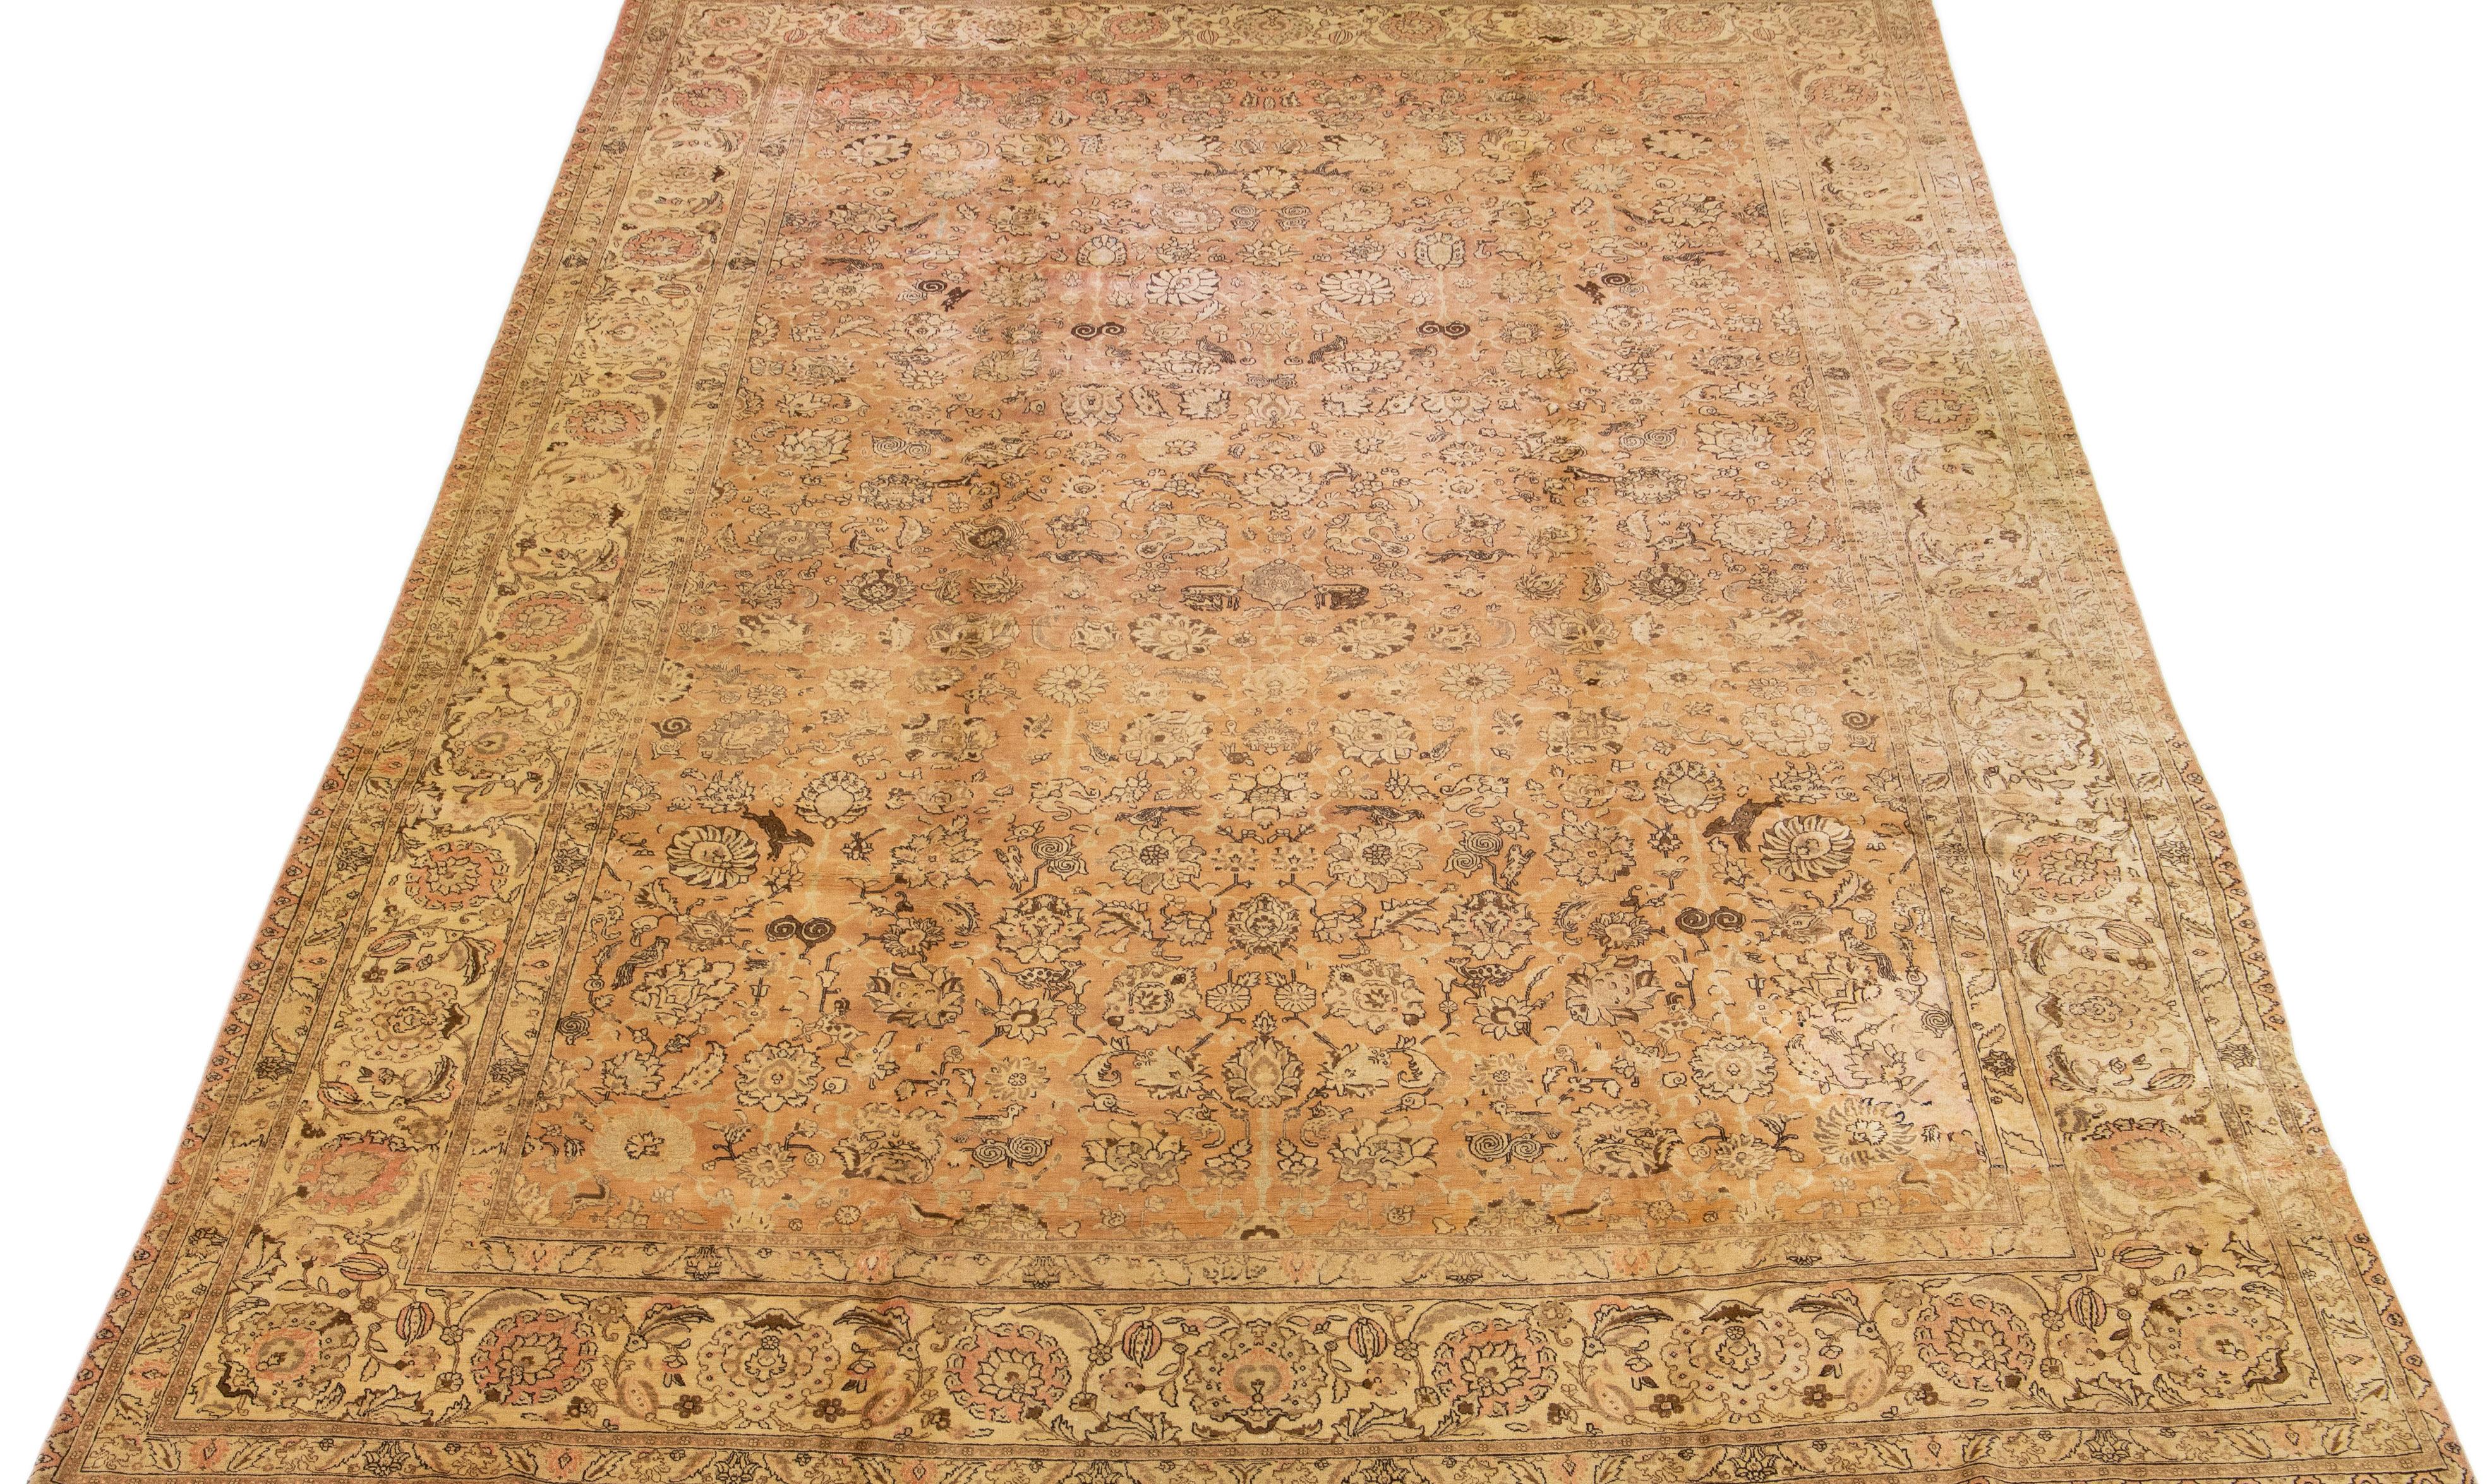 This Persian Tabriz wool rug showcases an exquisite traditional floral medallion design with a striking tan accent against a beige, blue, and brown background. 

This rug measures 12'7